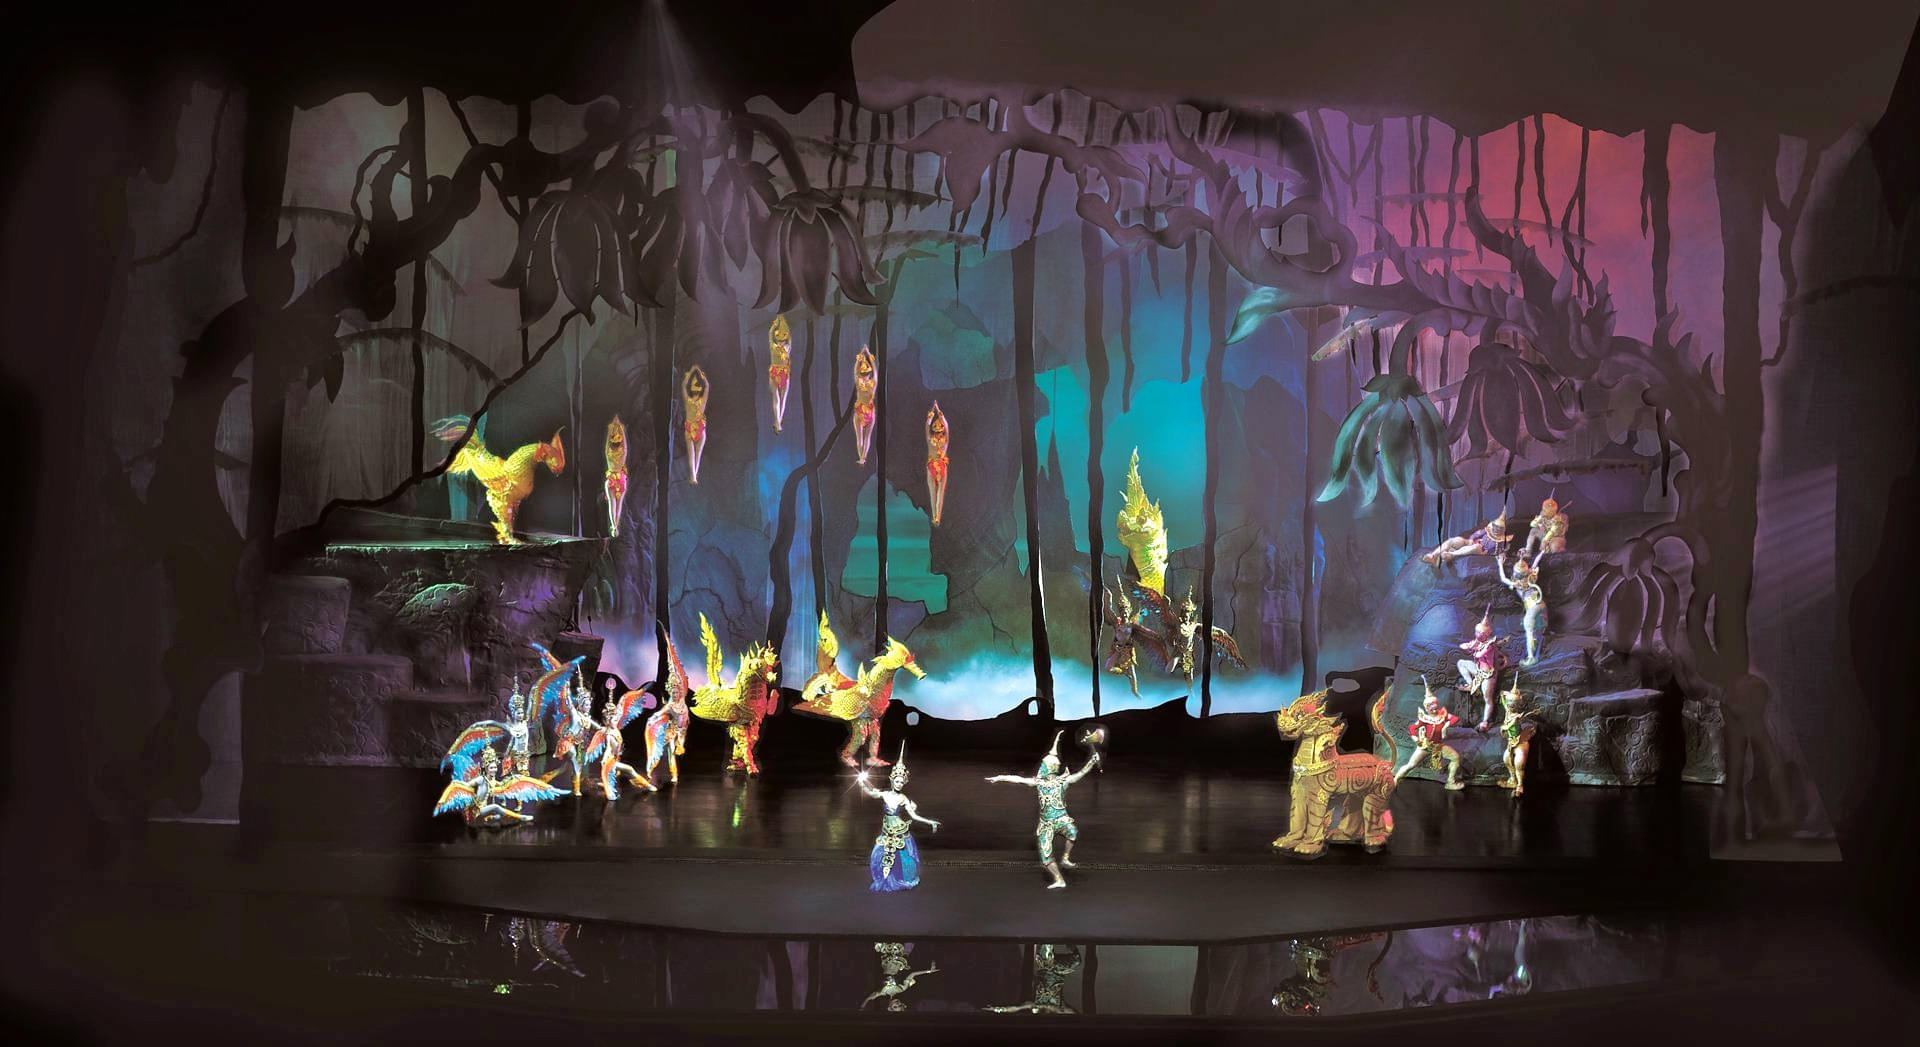 Enjoy one of the world's best shows with artistic backdrops